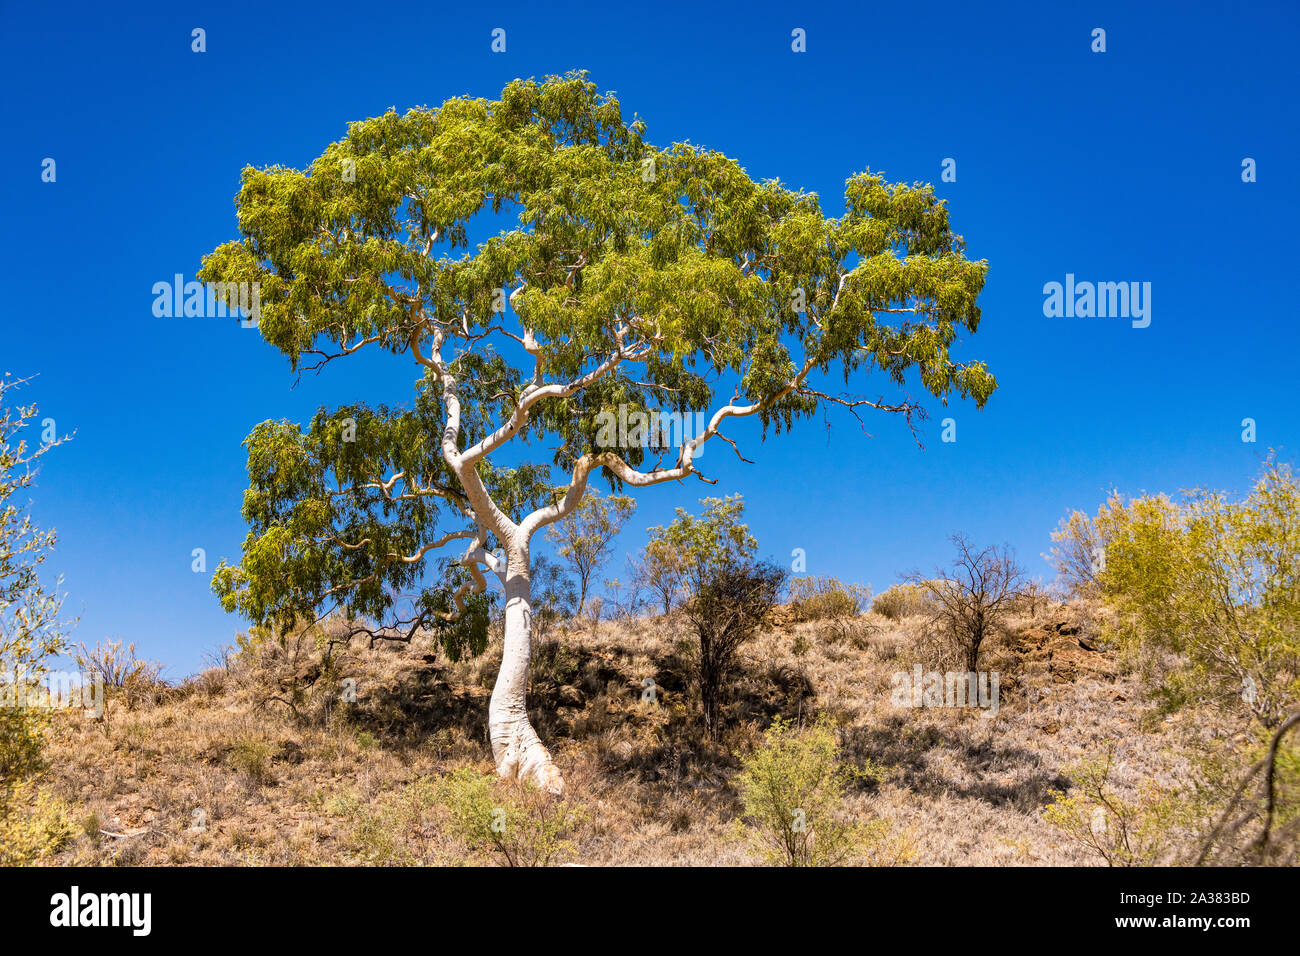 Large Ghost Gum tree in remote land in the Northern Territory, Australia Stock Photo